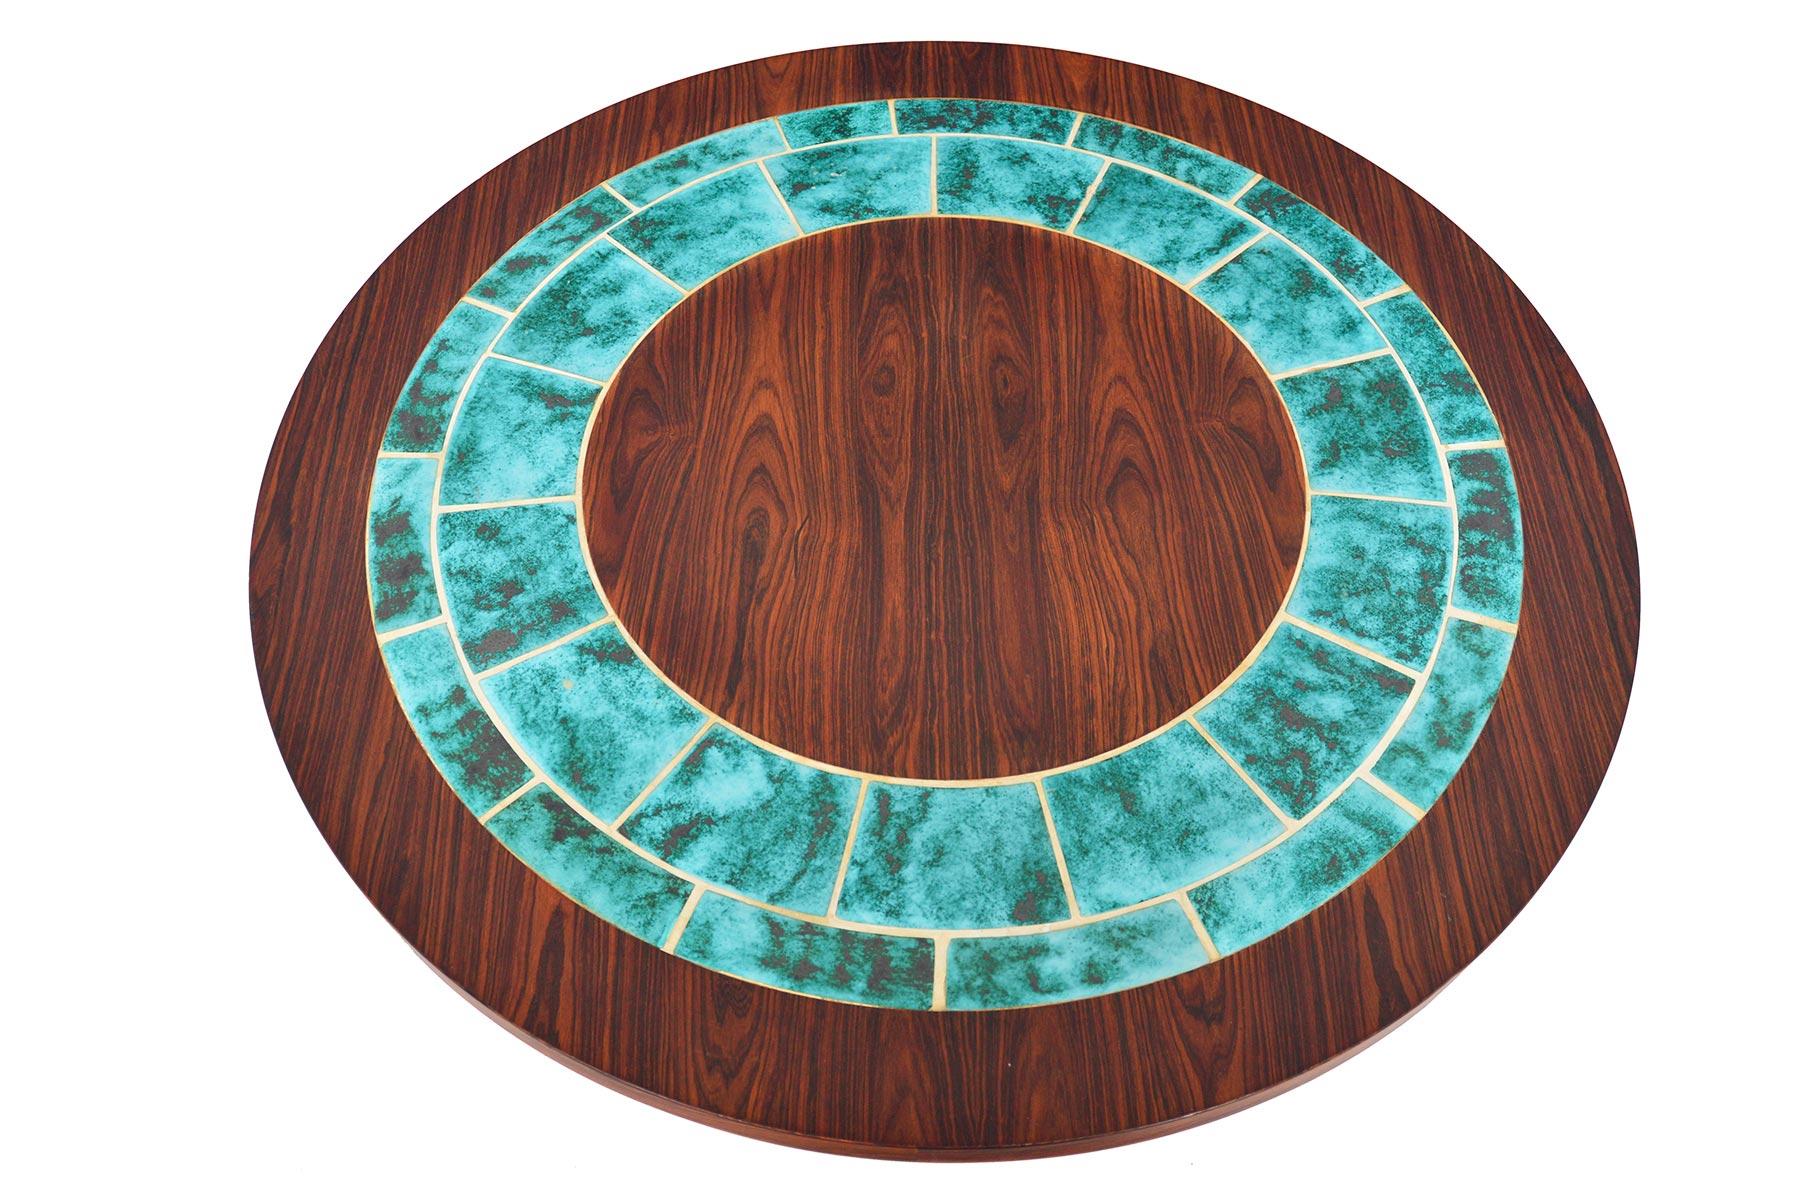 Space Age Danish Modern Round Rosewood and Turquoise Tile Coffee Table